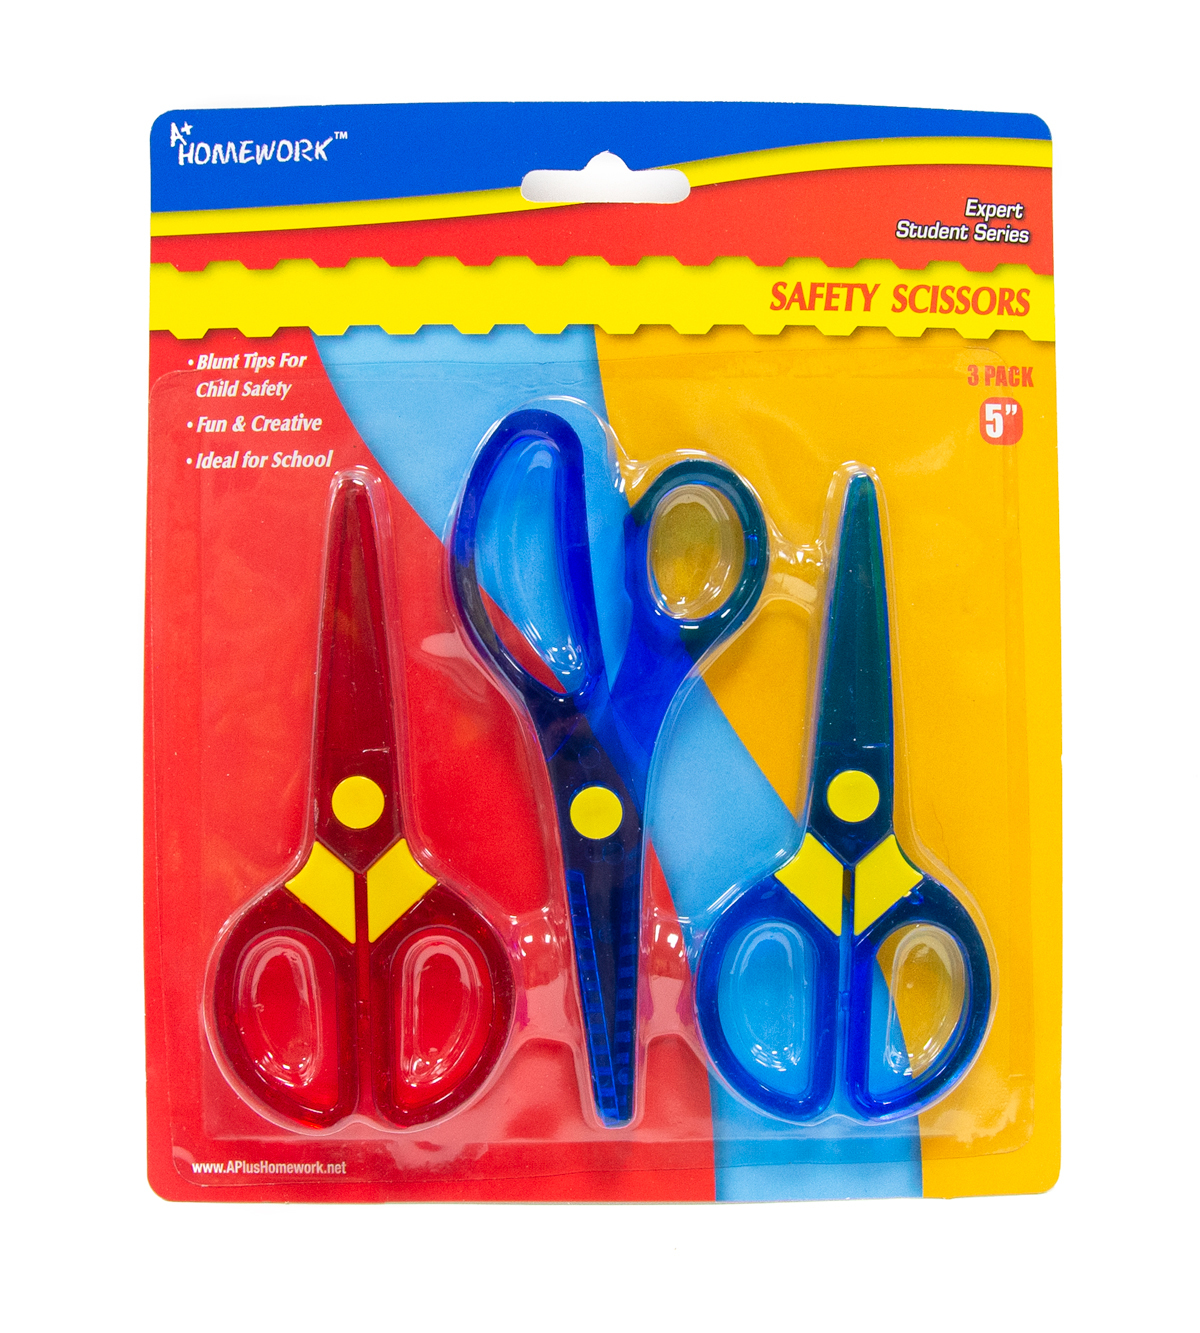 Safety Scissors - Assorted Colors, 3 Pack, 5